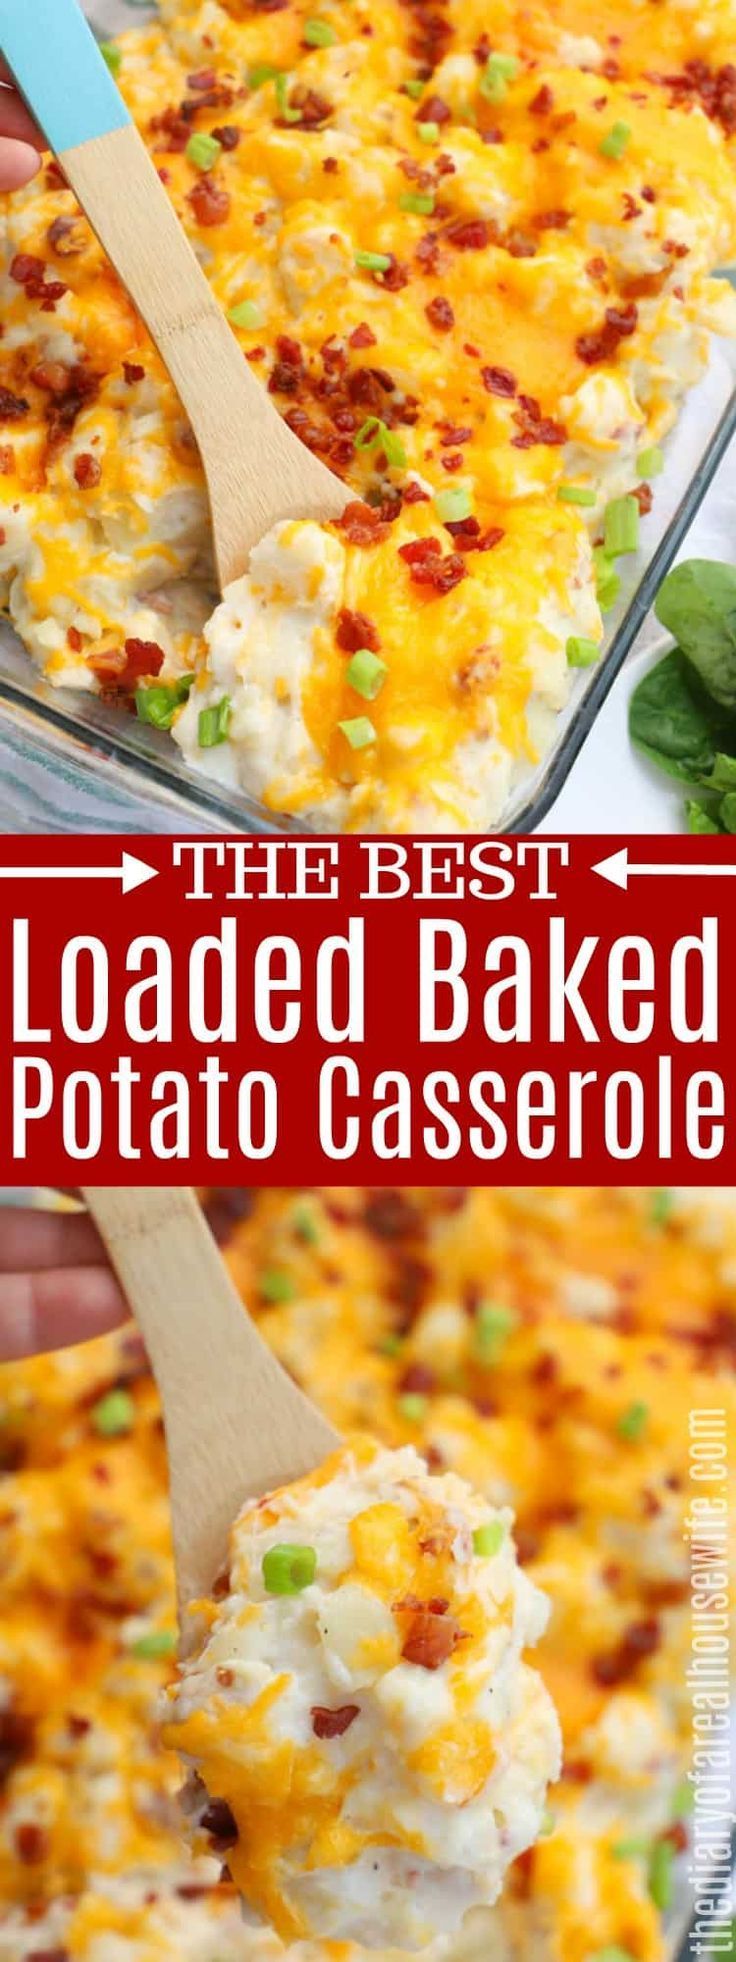 Loaded Baked Potato Casserole - The Diary of a Real Housewife - Loaded Baked Potato Casserole - The Diary of a Real Housewife -   21 thanksgiving recipes side dishes easy ideas